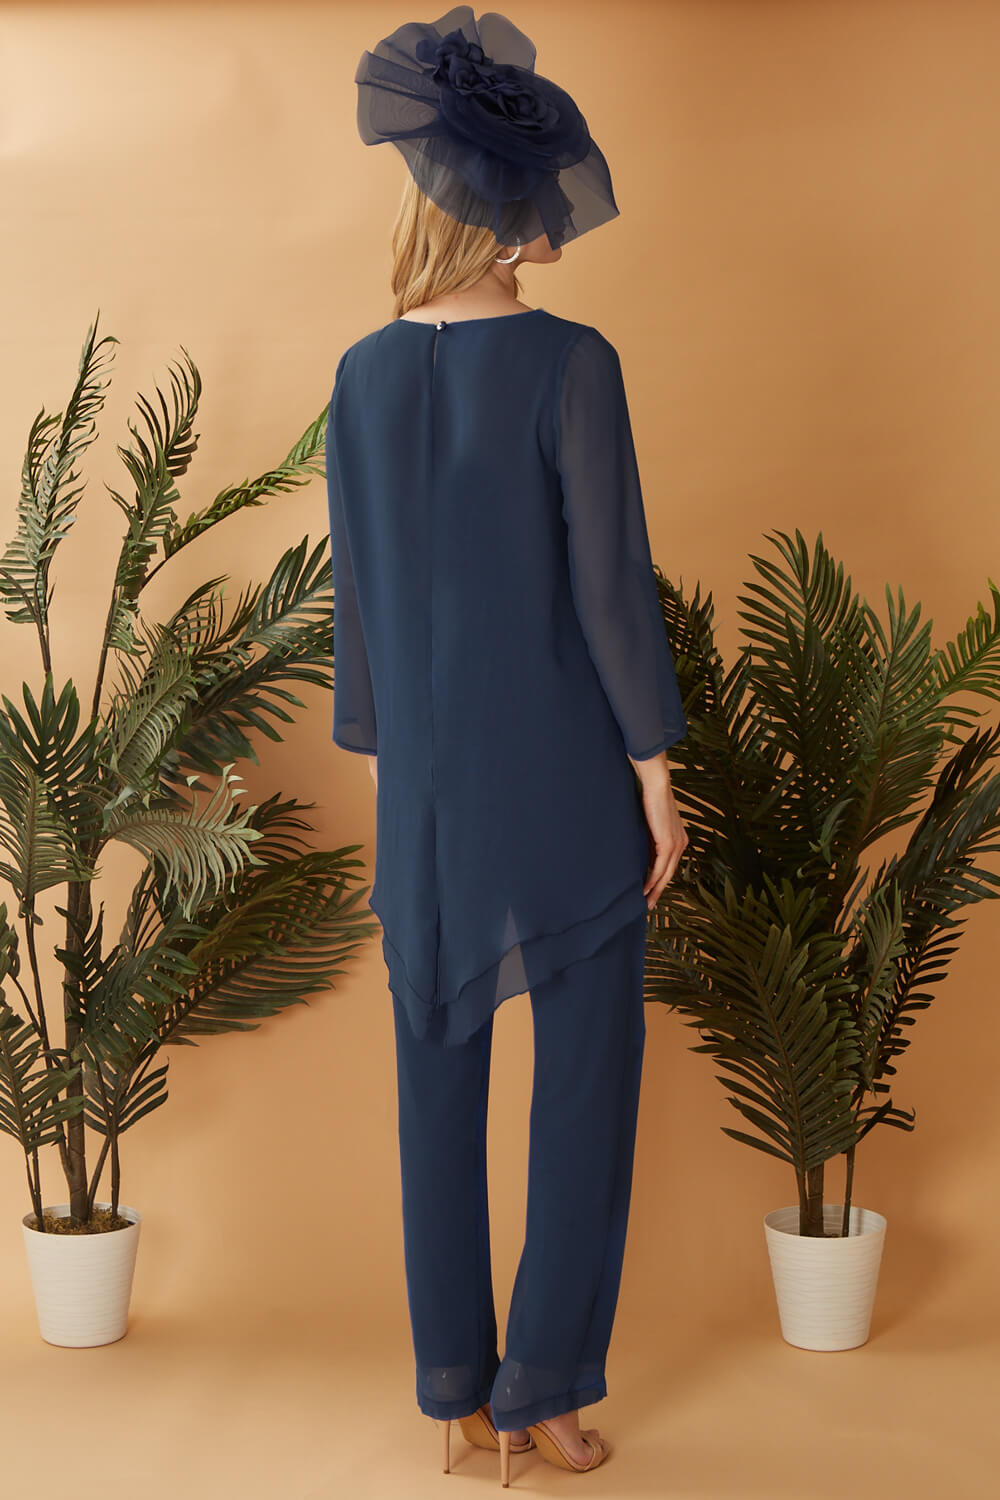 Elegant Navy Blue Trouser Suit for Women  Ideal for Wedding Guests   Cerrura Fashions